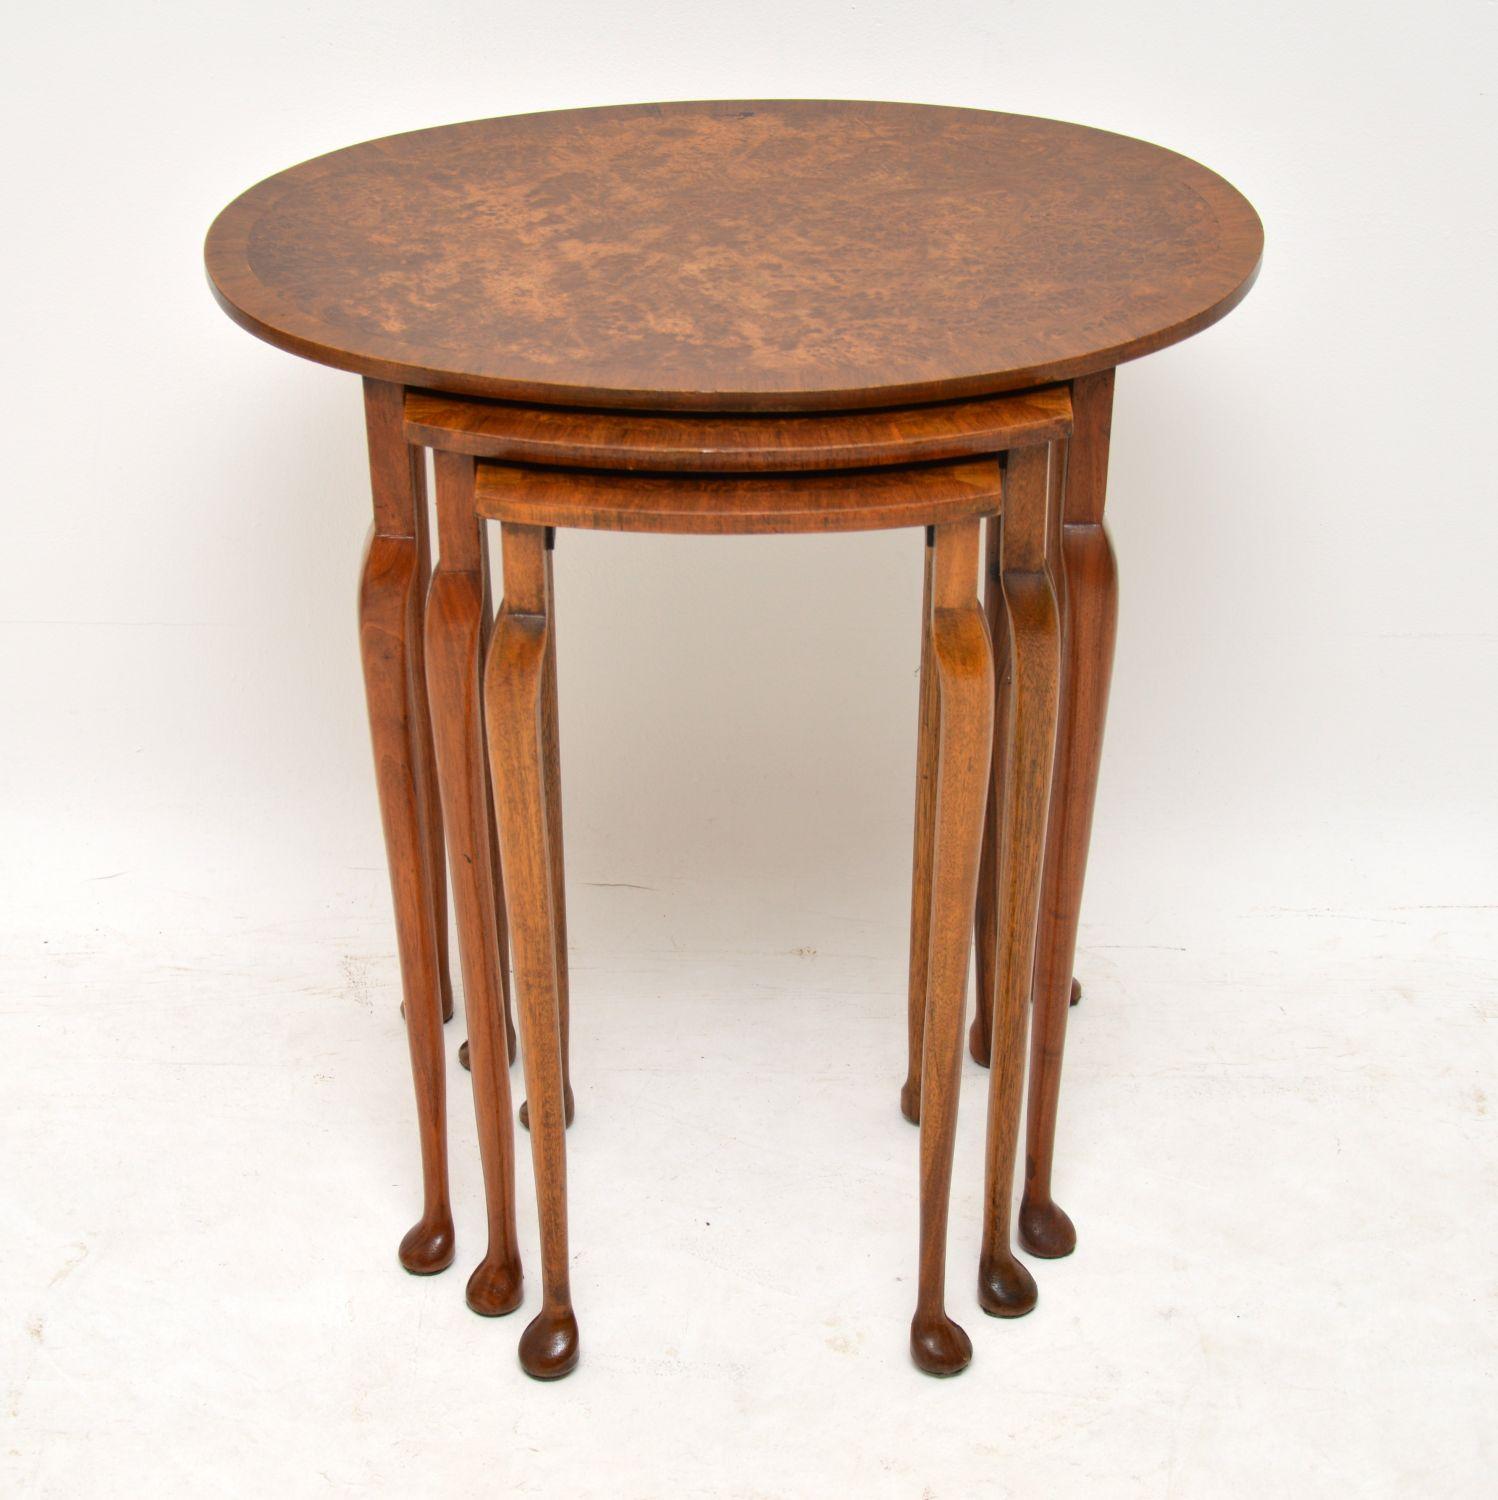 Antique burr walnut nest of tables dating from around the 1920s-1930s period and in excellent condition, having just been French polished. The table tops are a tight burr walnut with cross banded edges and they sit on Queen Anne legs.

Measures: